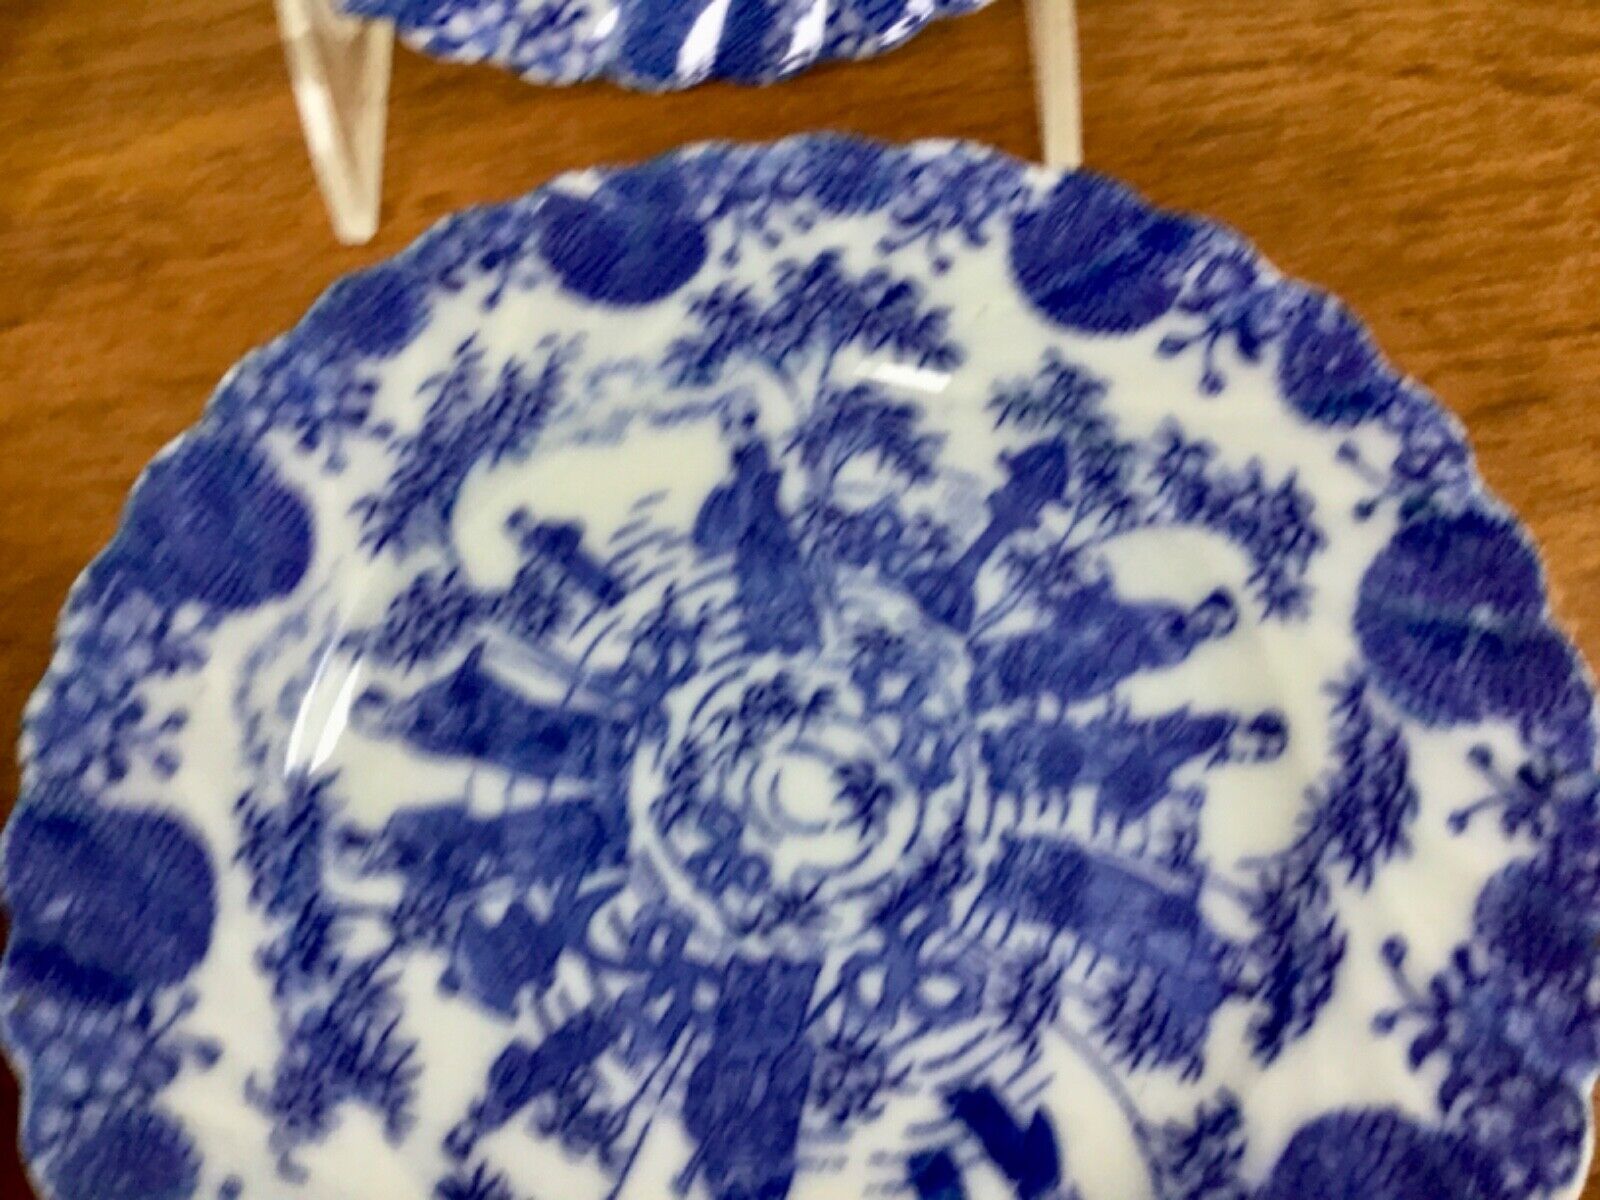  Antique Asian /Chines /Japanese 4 Blue & White Plates Decorated w Sages 6 1/4” Без бренда - фотография #8